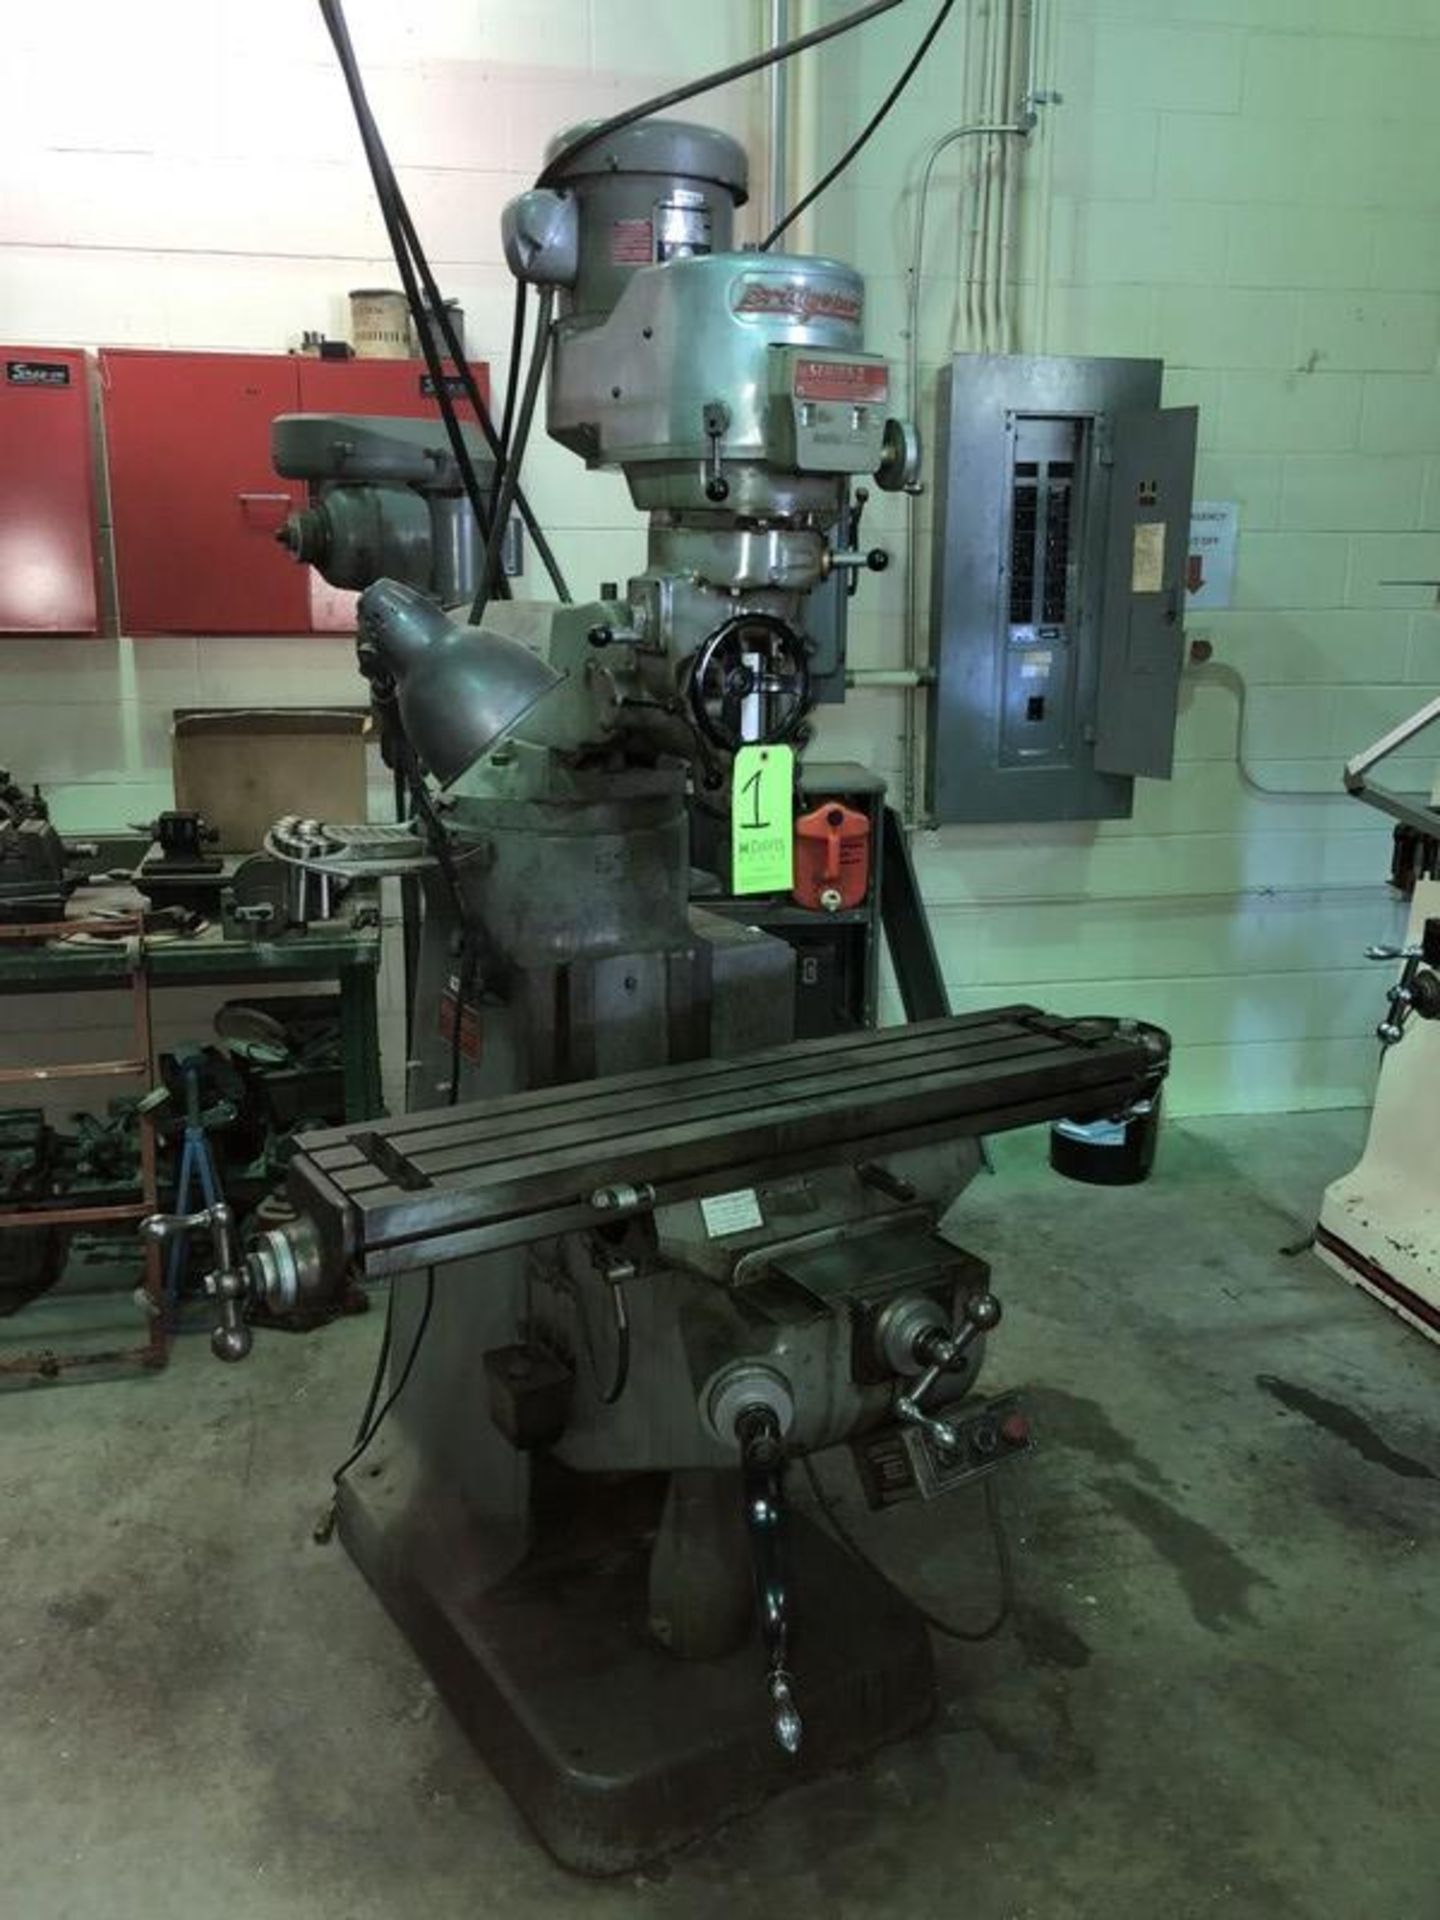 Bridgeport Vertical Milling Machine, S/N 2J-82761/2, Series 1, with 2 hp Spindle Speed, with 42" L x